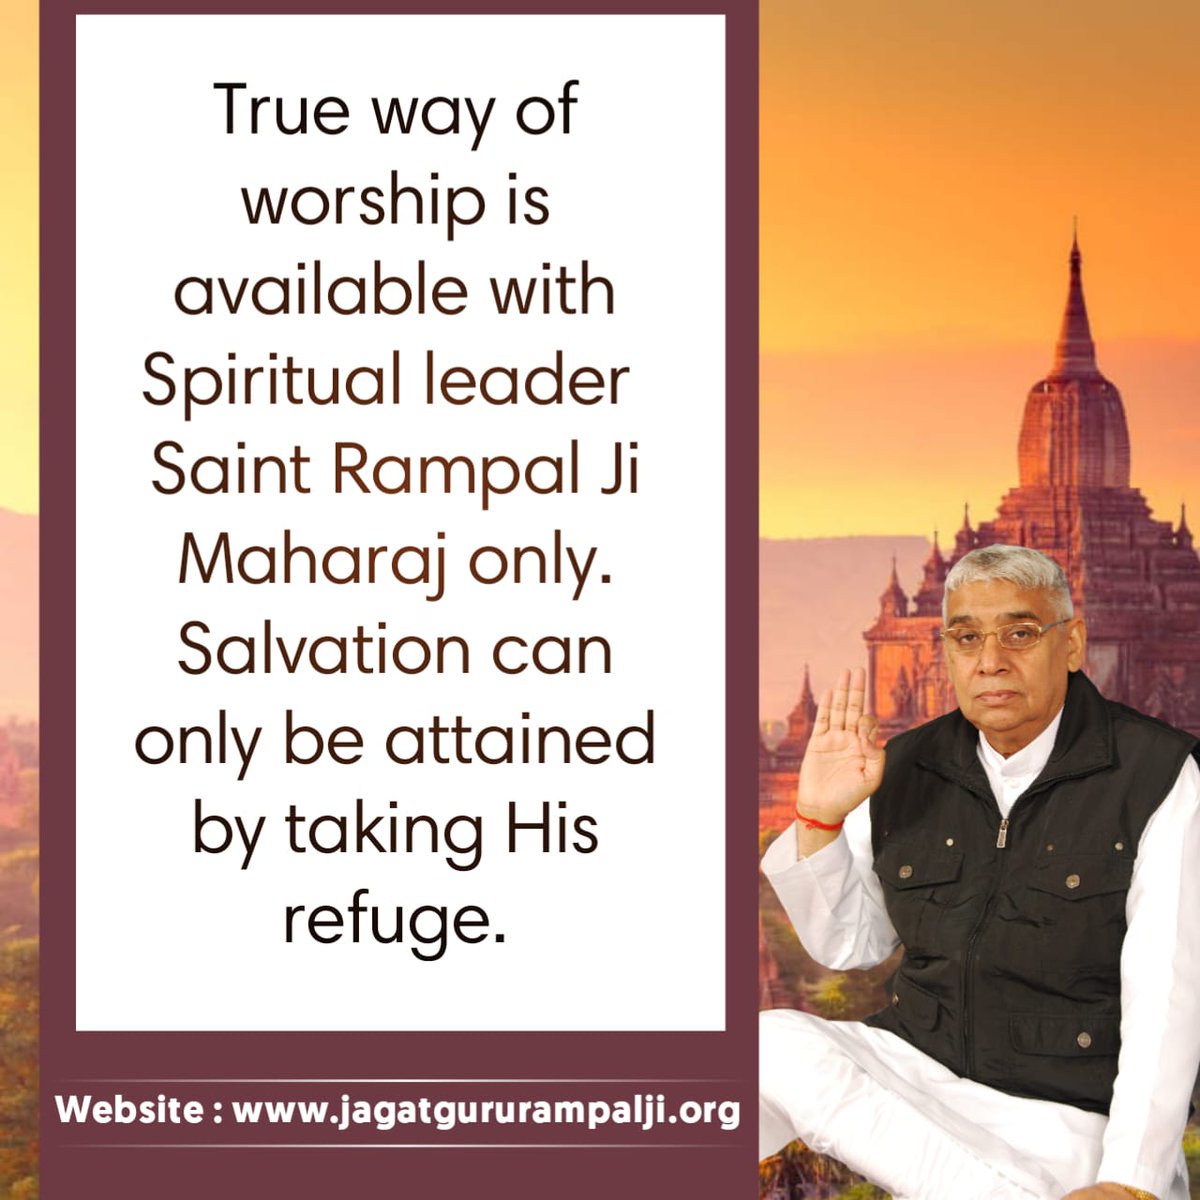 #GodMorningSaturday True way of worship is available with Spiritual Leader JagatGuru Tatvadarshi Saint Rampal Ji Maharaj only. Salvation can only be attained by taking His refuge. @SaintRampalJiM Visit Saint Rampal Ji Maharaj YouTube Channel for More Information #Saturdayvibes